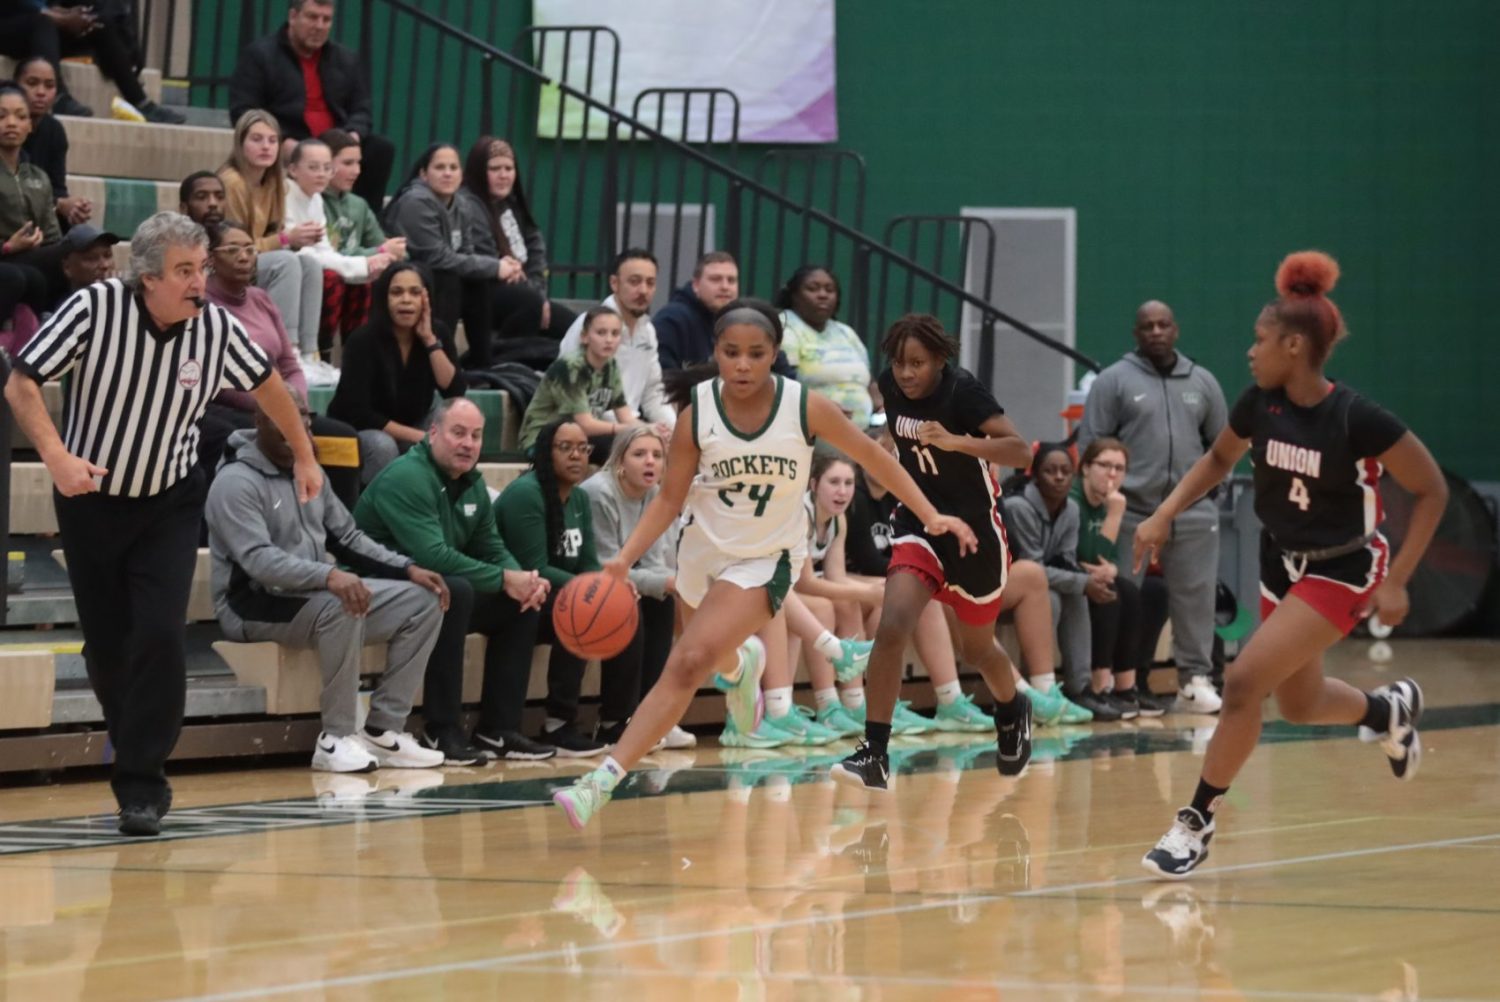 Reeths-Puffer routs GR Union in OK-Green hoops action